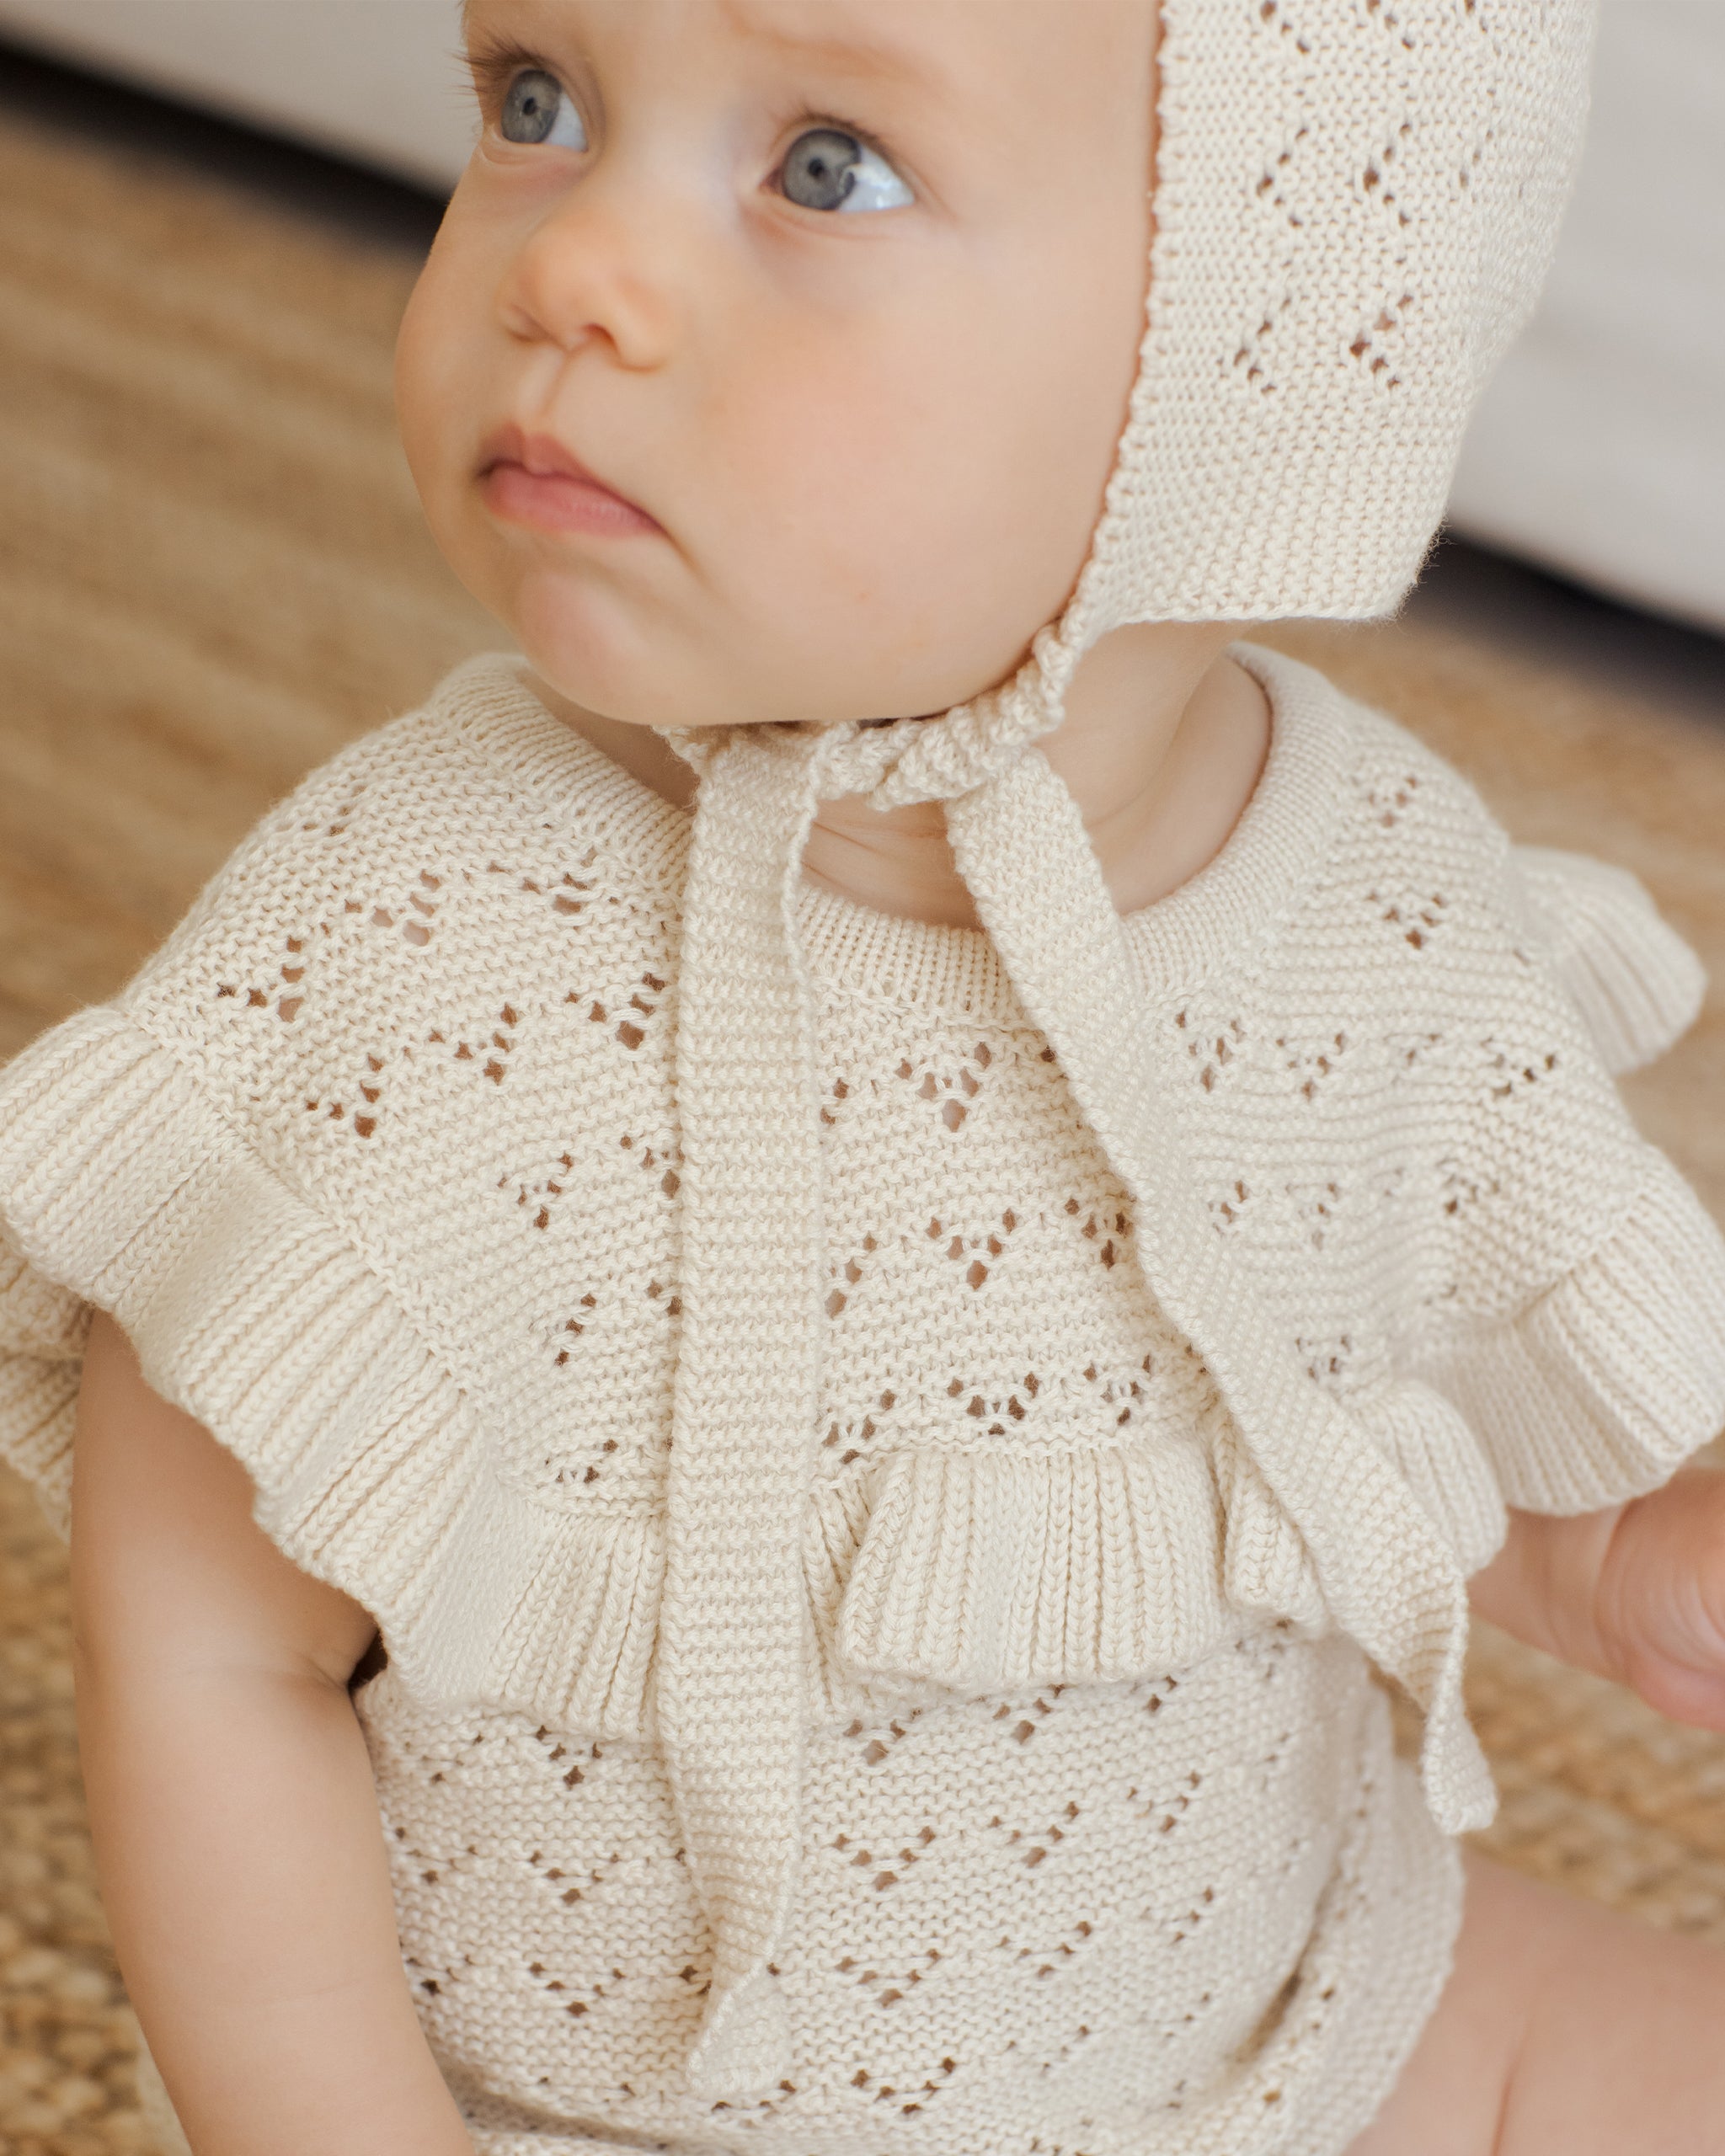 Pointelle Ruffle Romper || Natural - Rylee + Cru | Kids Clothes | Trendy Baby Clothes | Modern Infant Outfits |